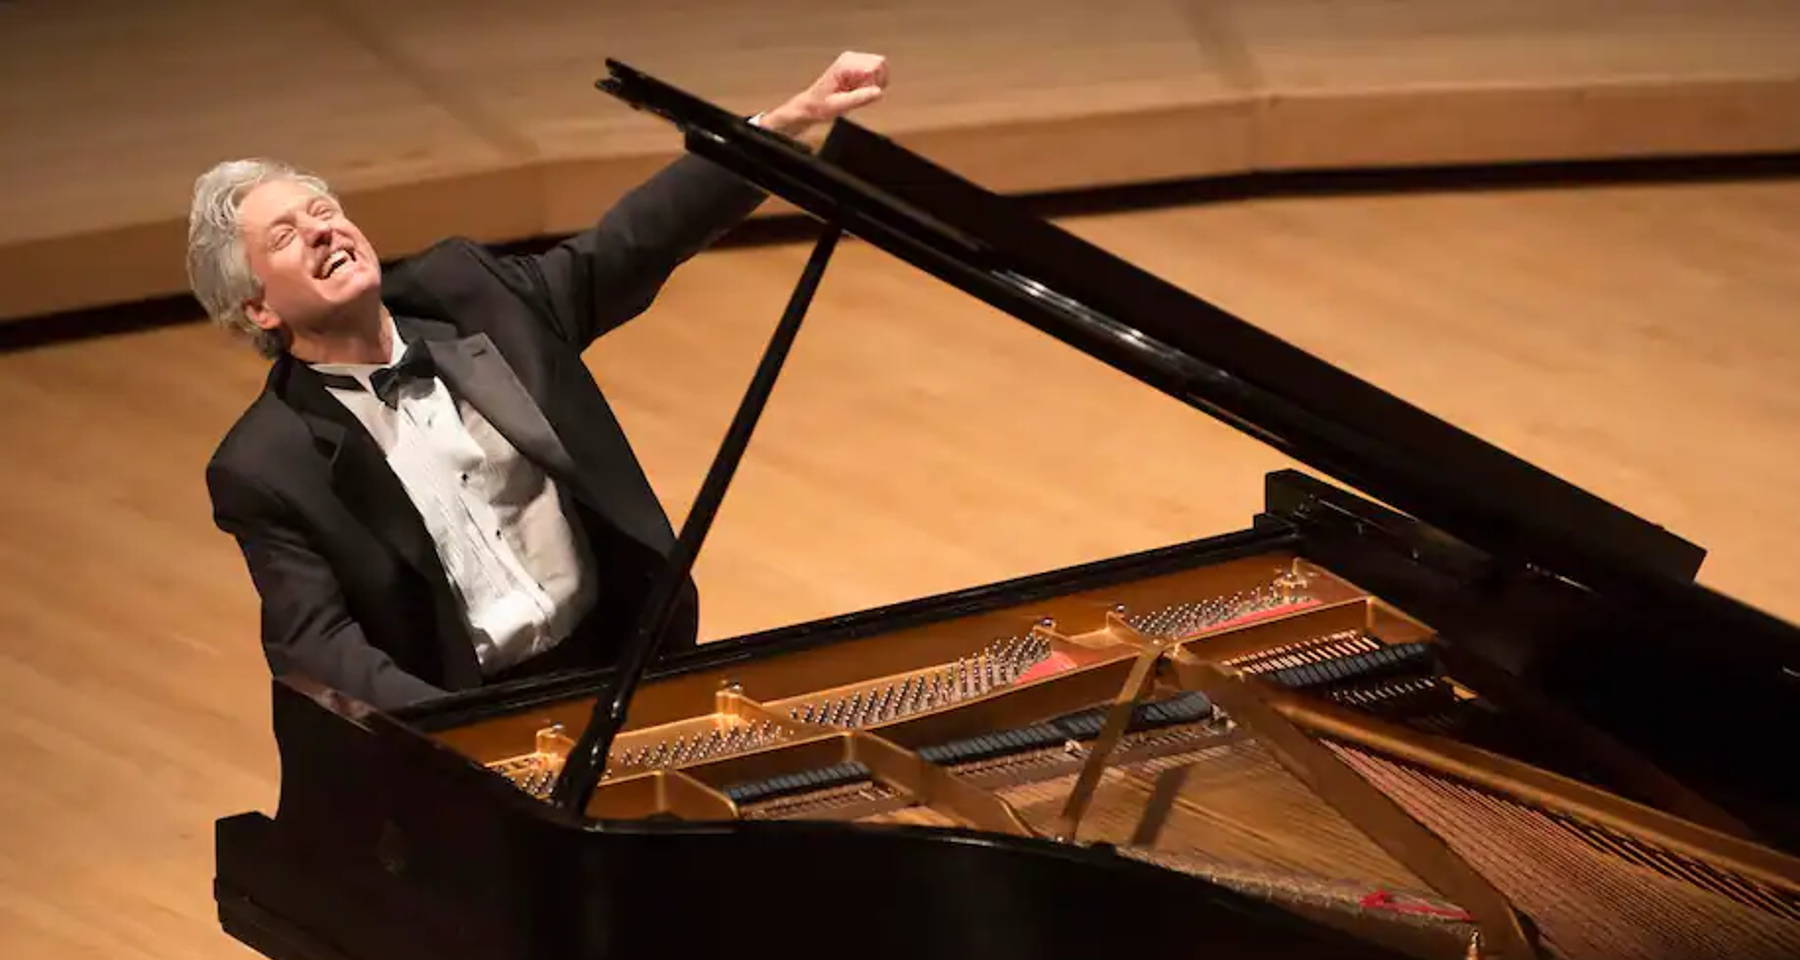 An evening with Pianist and Raconteur Brian Ganz: Romanticism and the Revolutionary Spirit in the works of Chopin and Delacroix